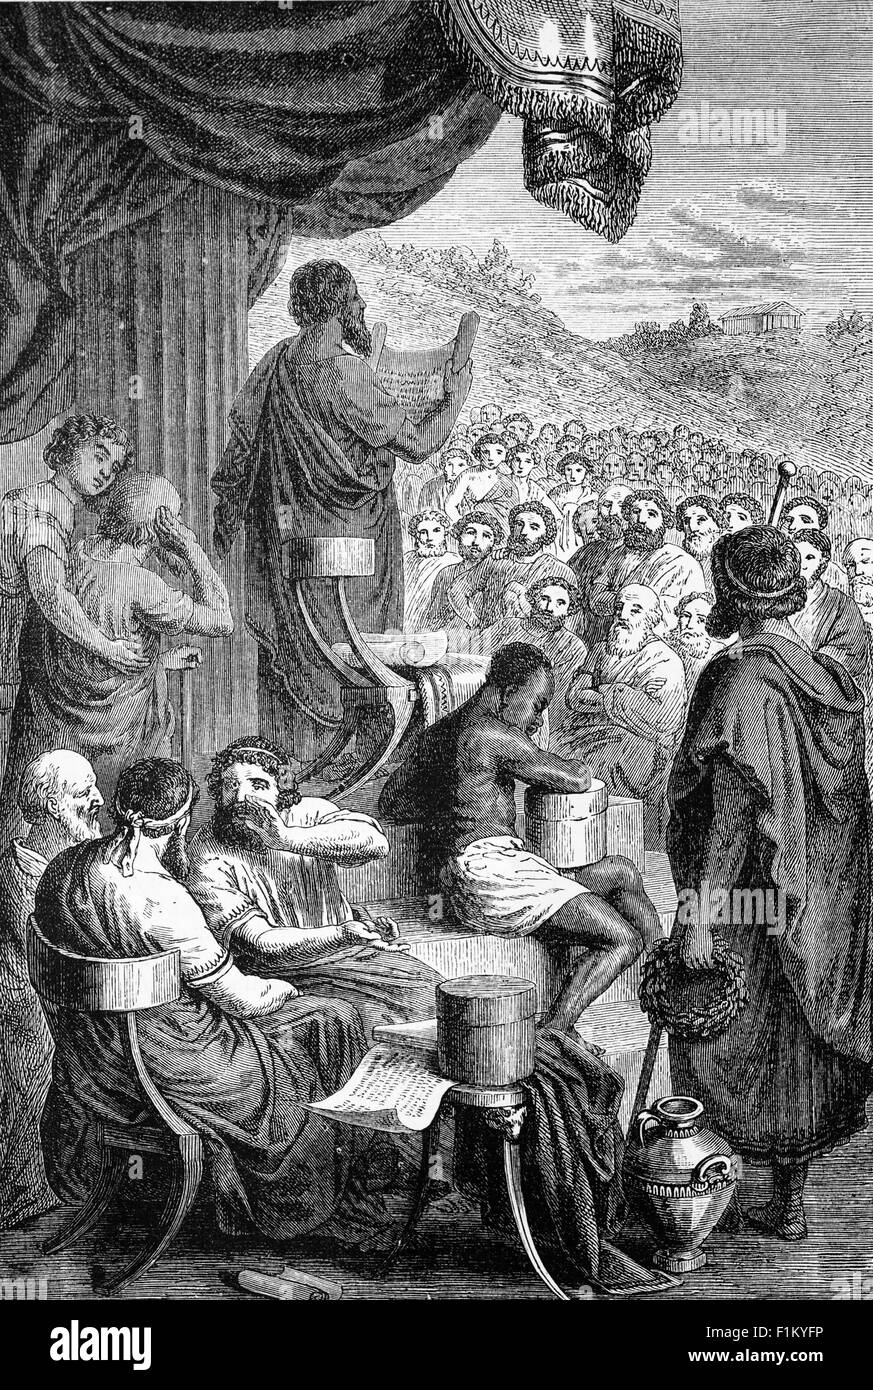 Herodotus, an ancient Greek historian Reading History at a Public Festival, He was born in Halicarnassus, Caria (modern day Bodrum, Turkey) and lived in the fifth century BC. Stock Photo